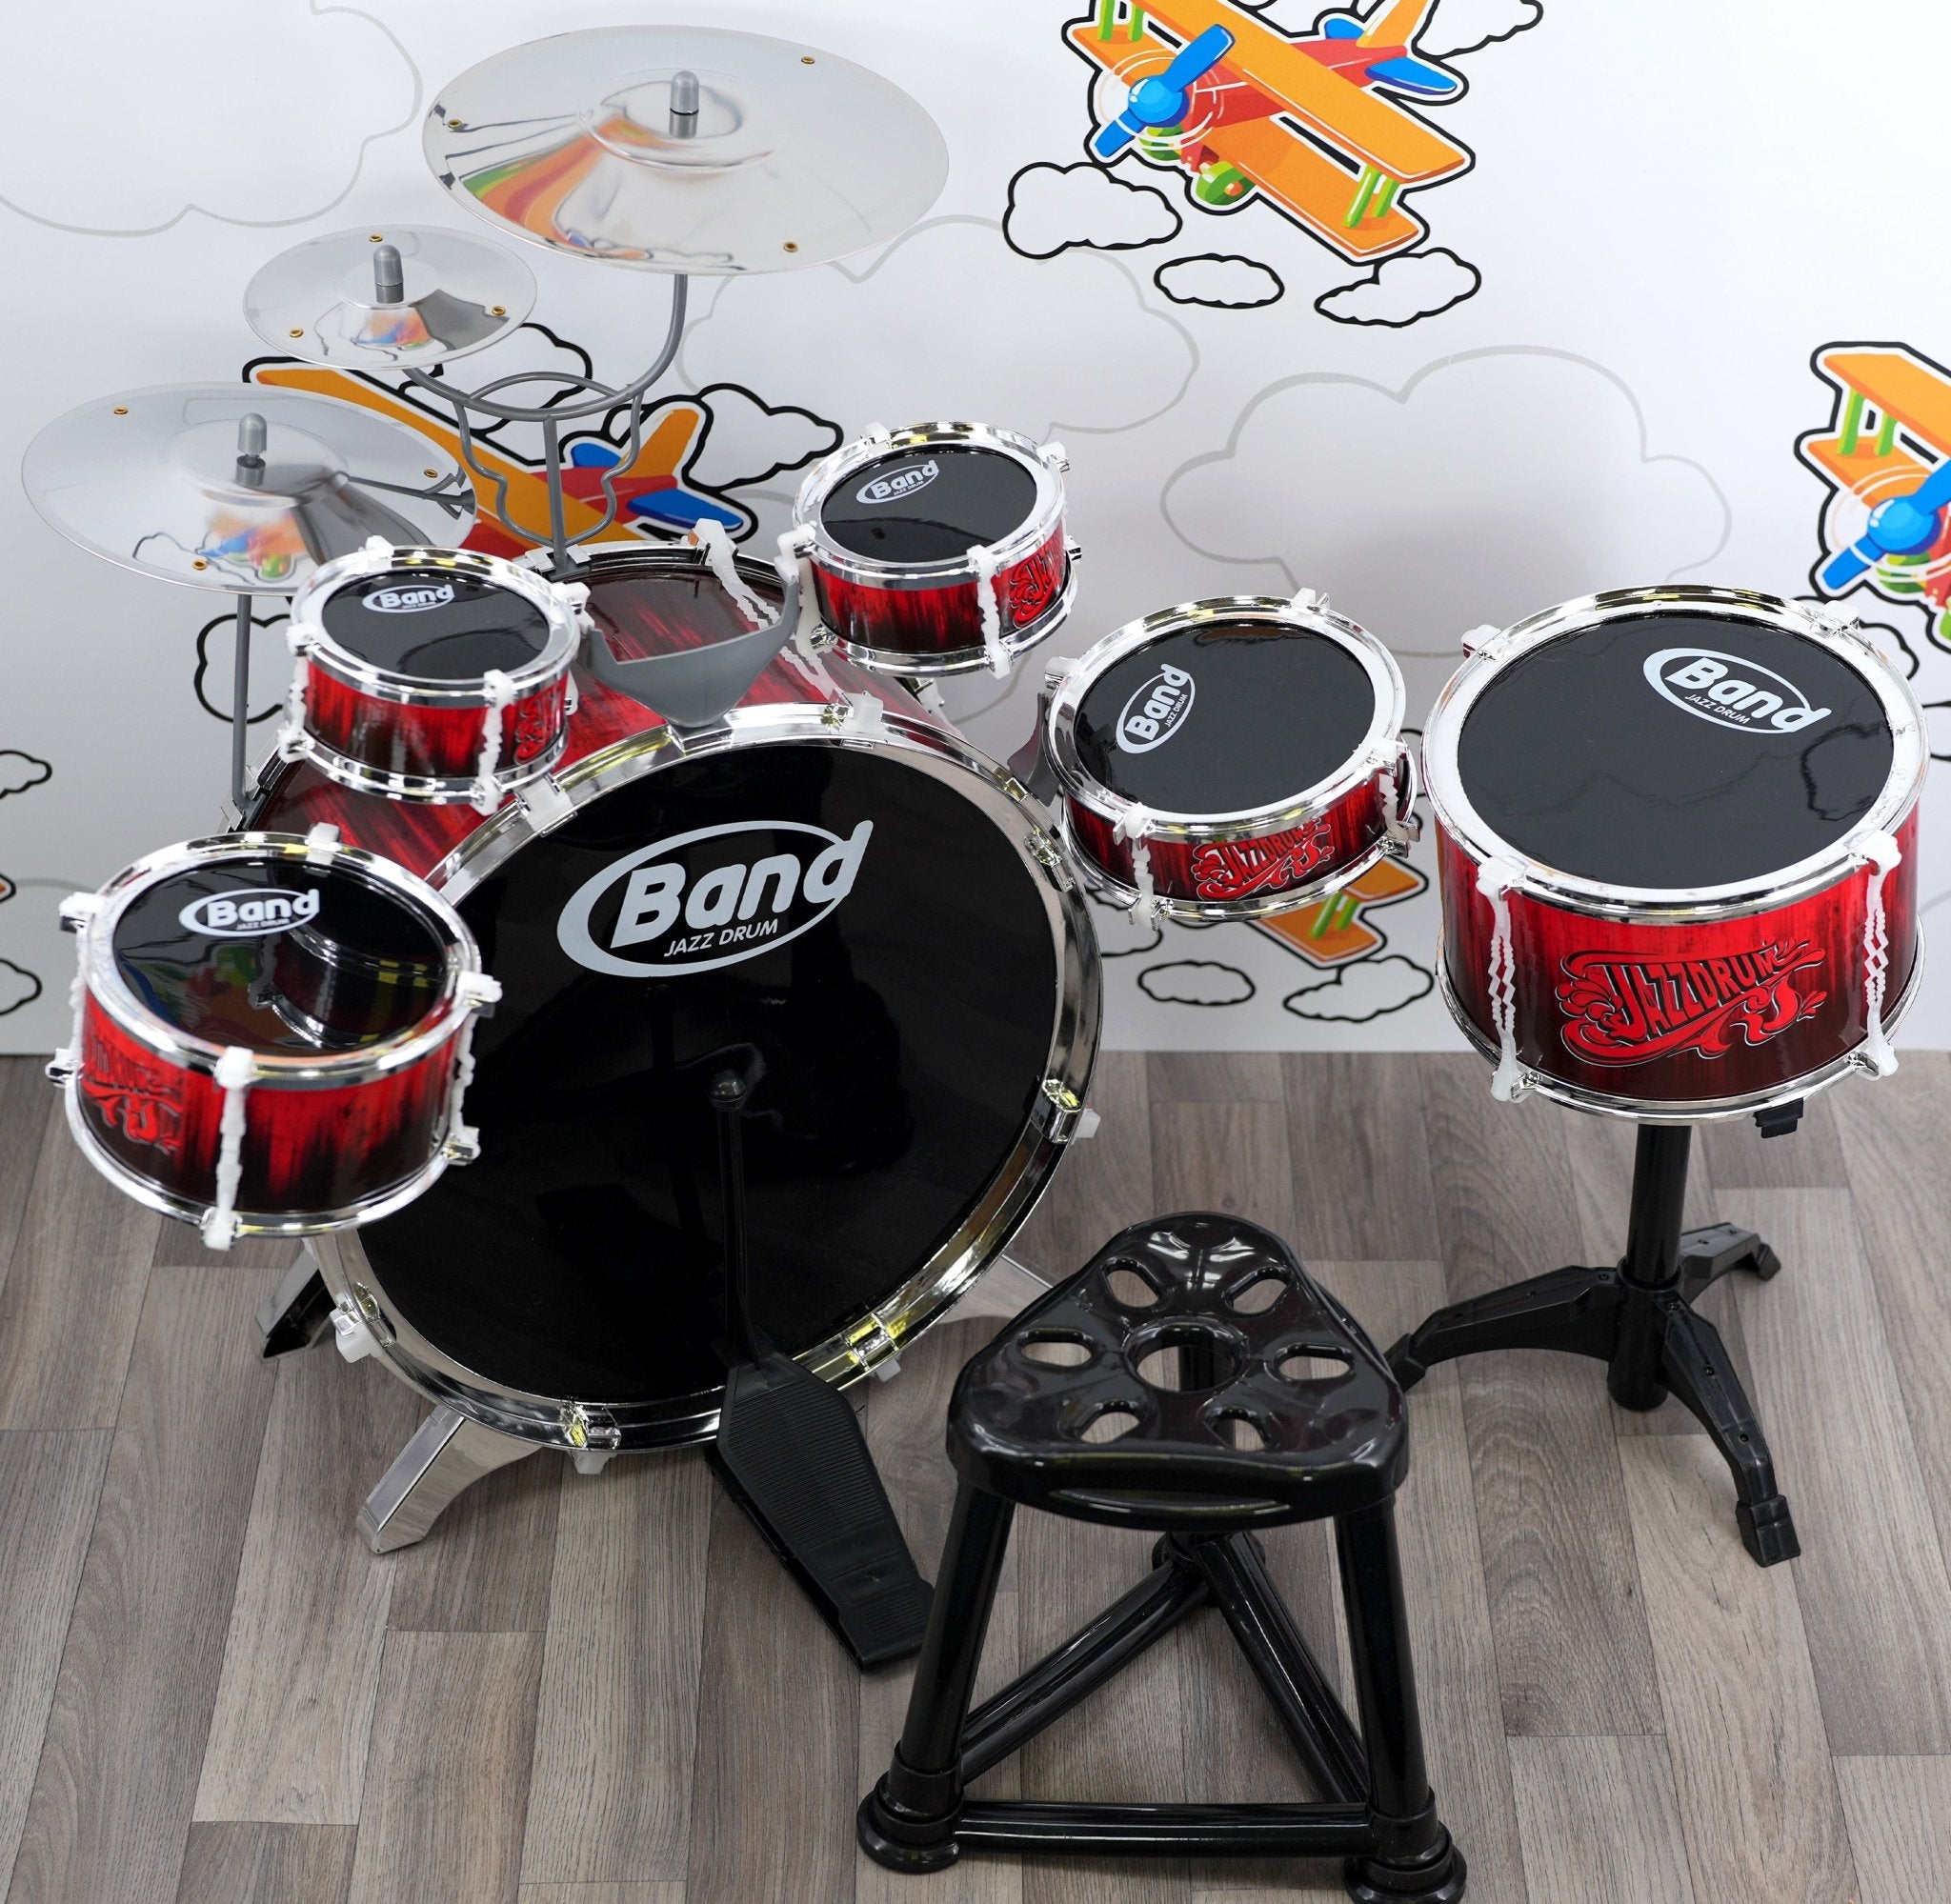 Kids Drum Kit With Stool 10 Piece The Magic Toy Shop - The Magic Toy Shop